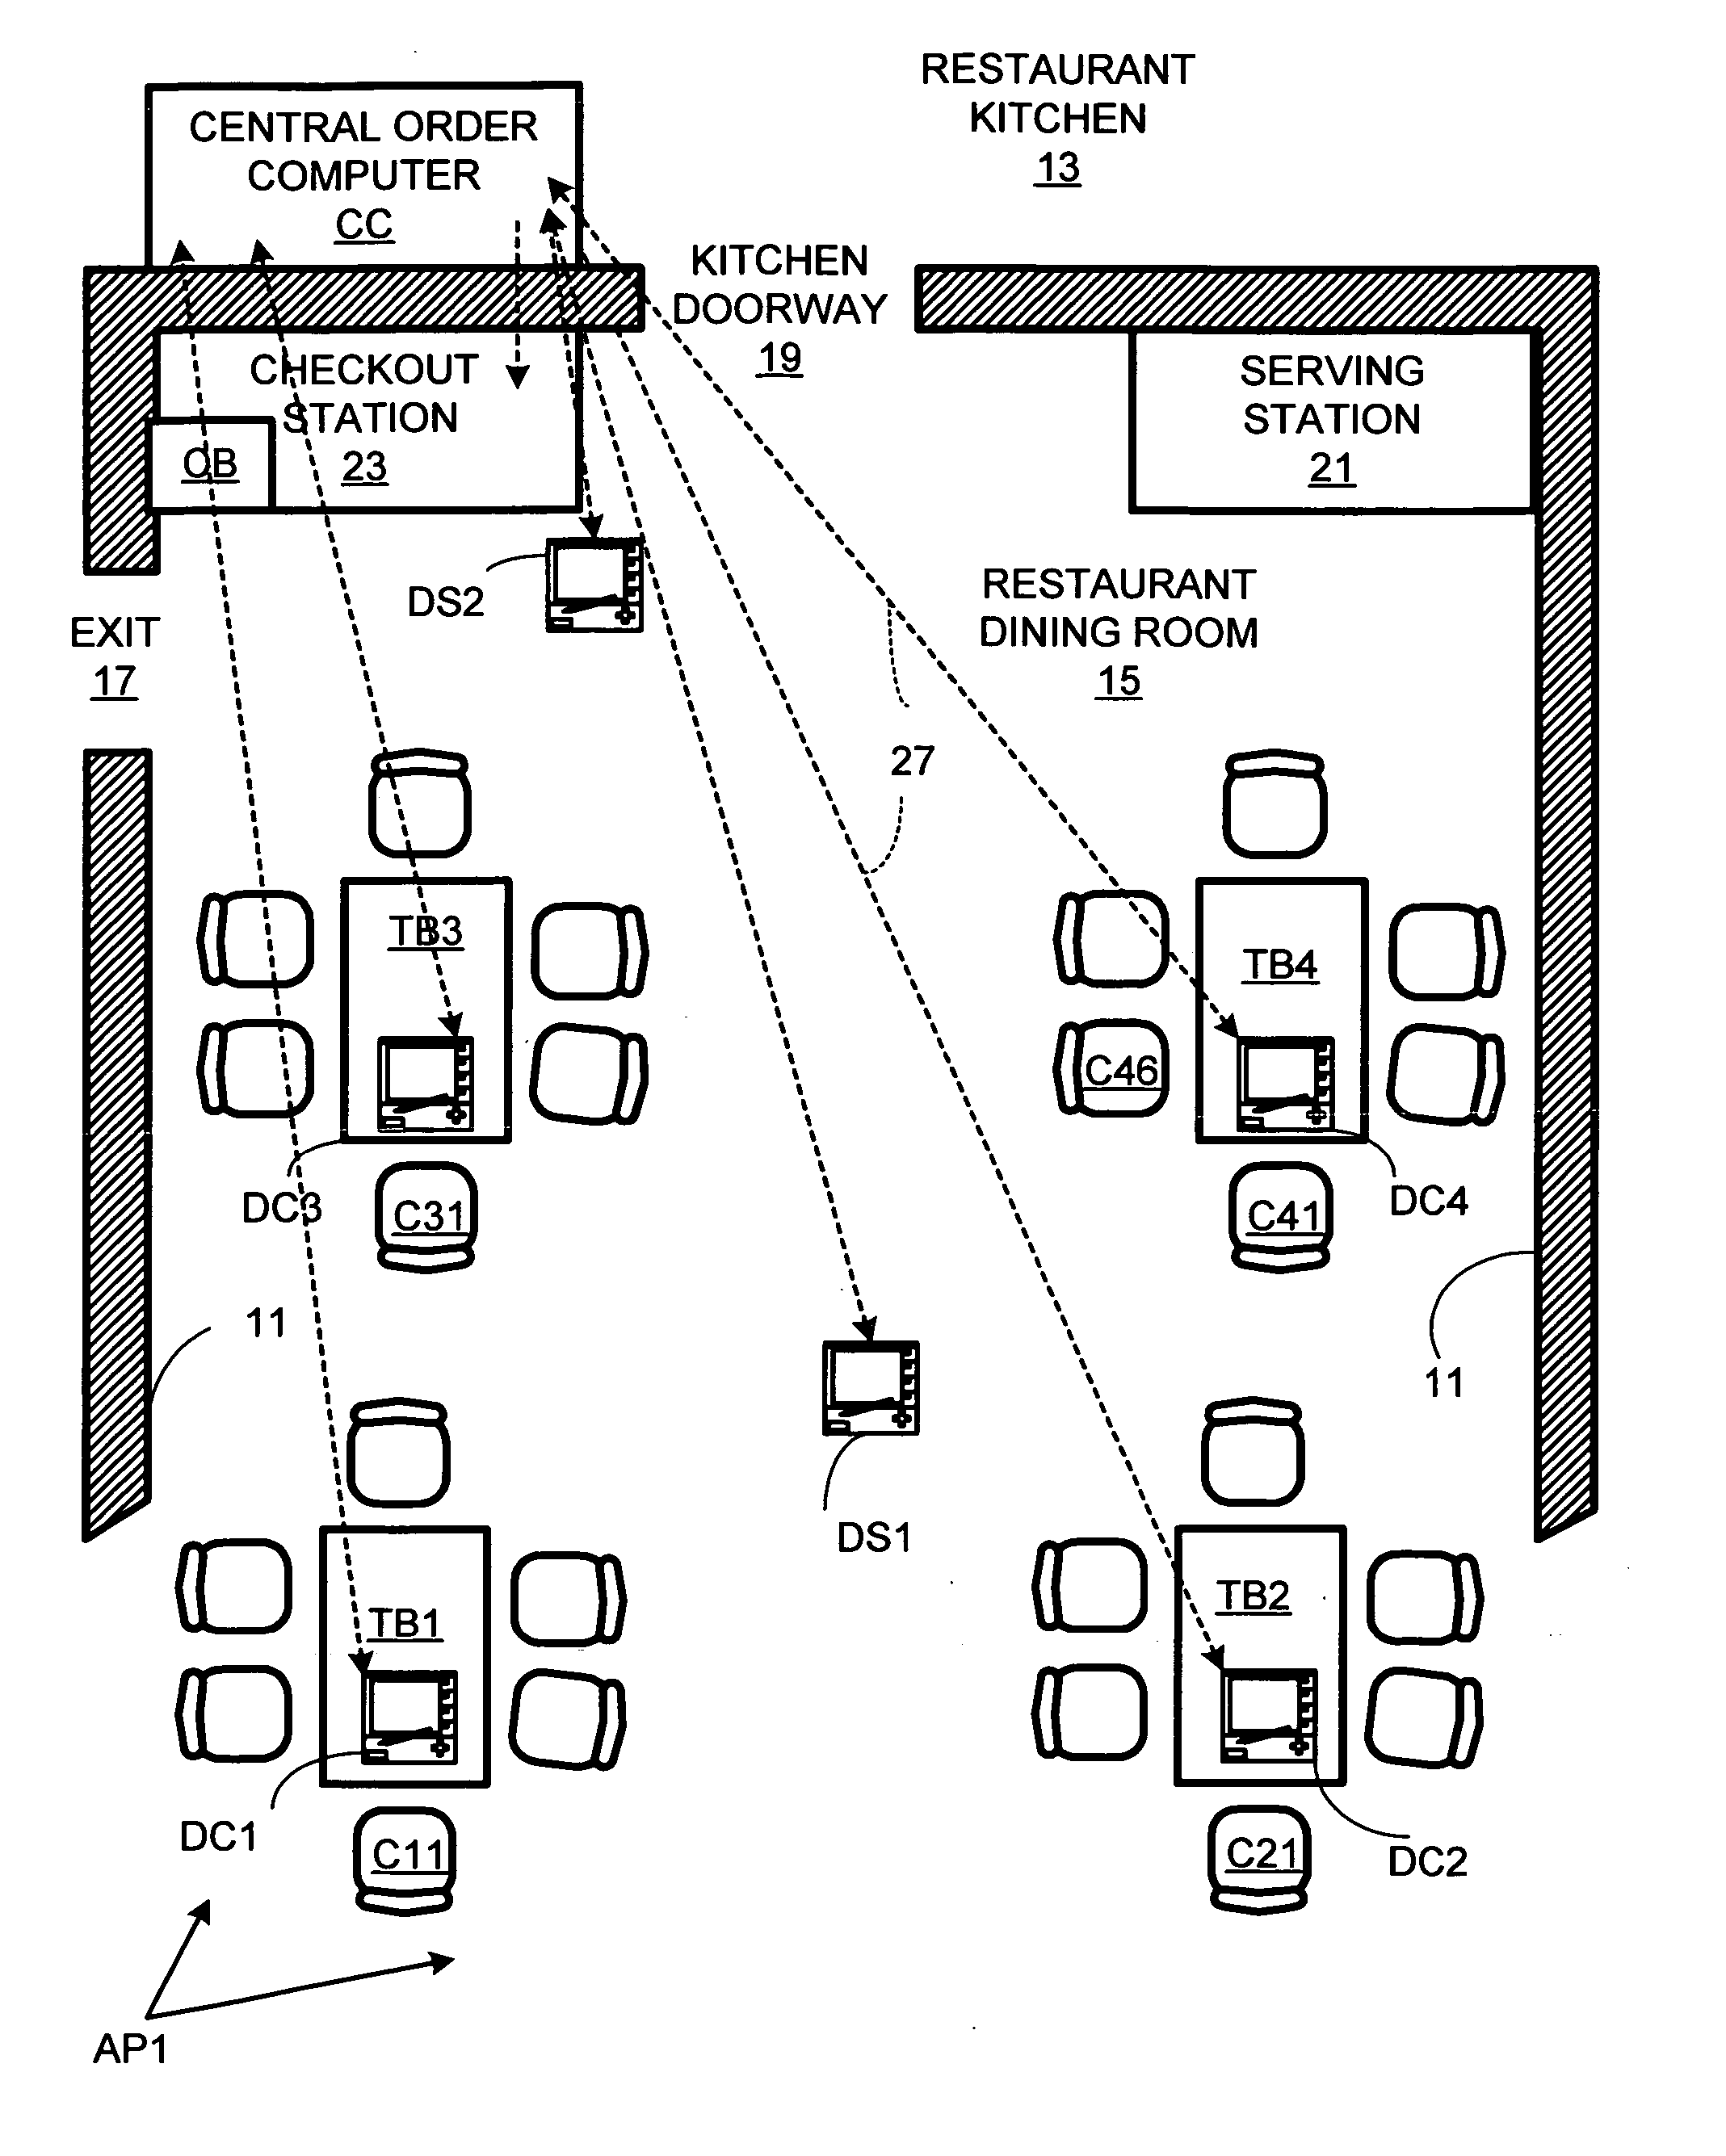 Restaurant management using network with customer-operated computing devices